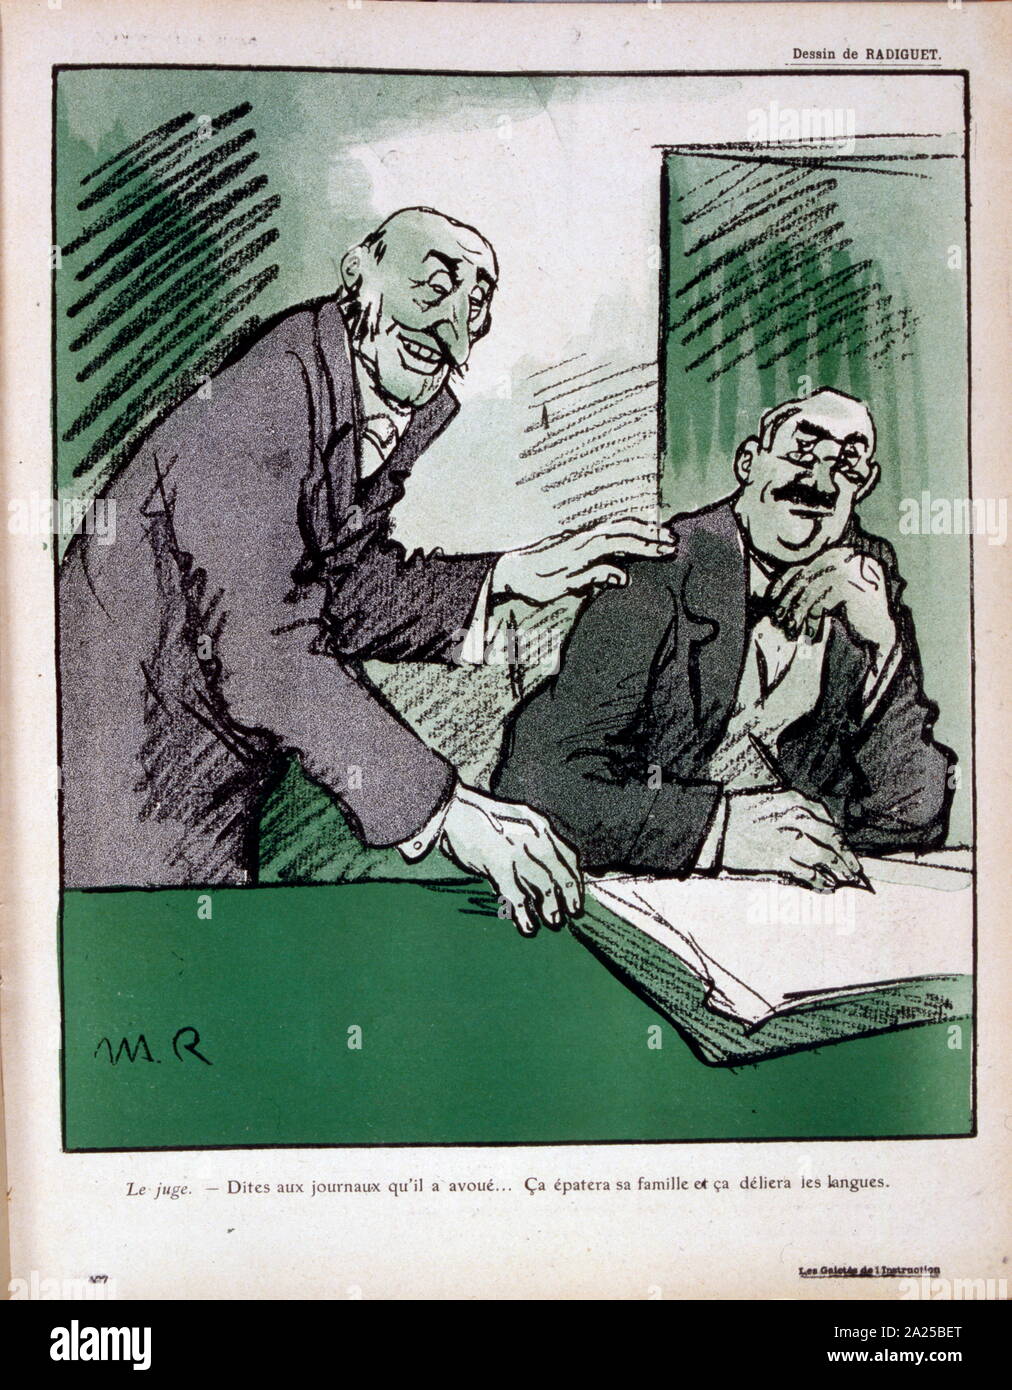 Illustration depicting a French judge influenced by a lawyer. 1908 Stock Photo